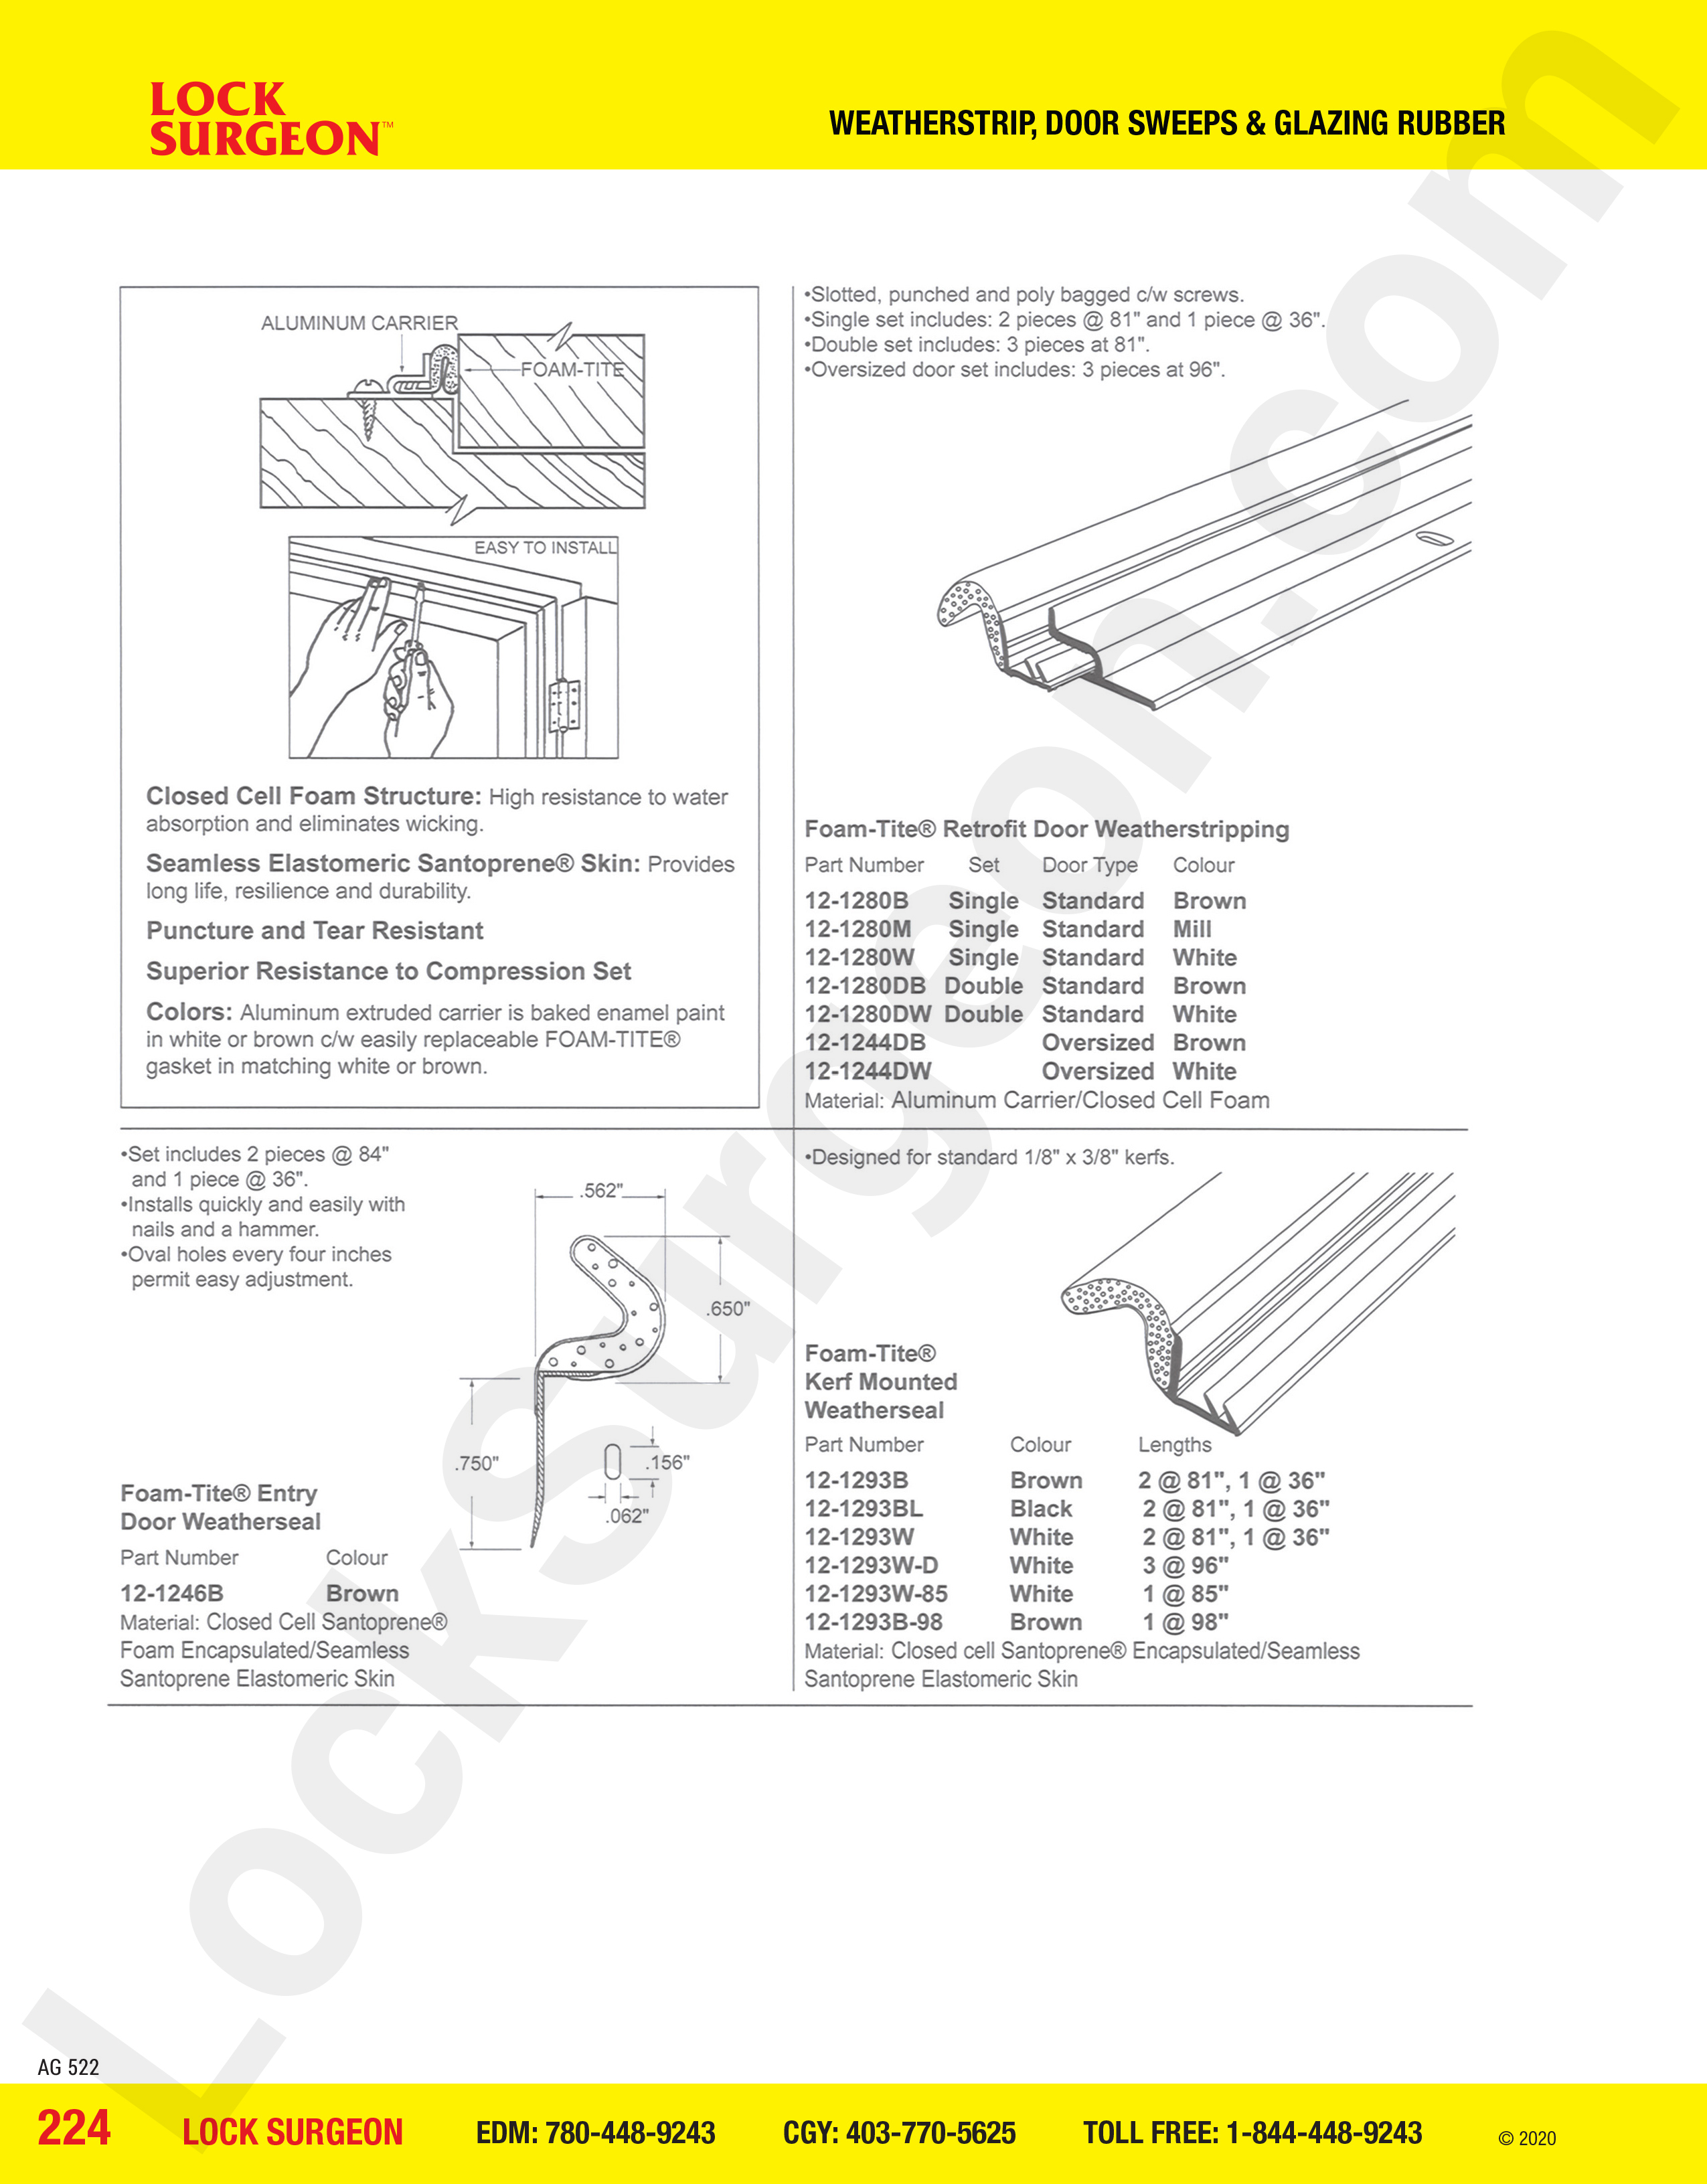 weatherstrip door sweeps and glazing rubber and foam-tile parts